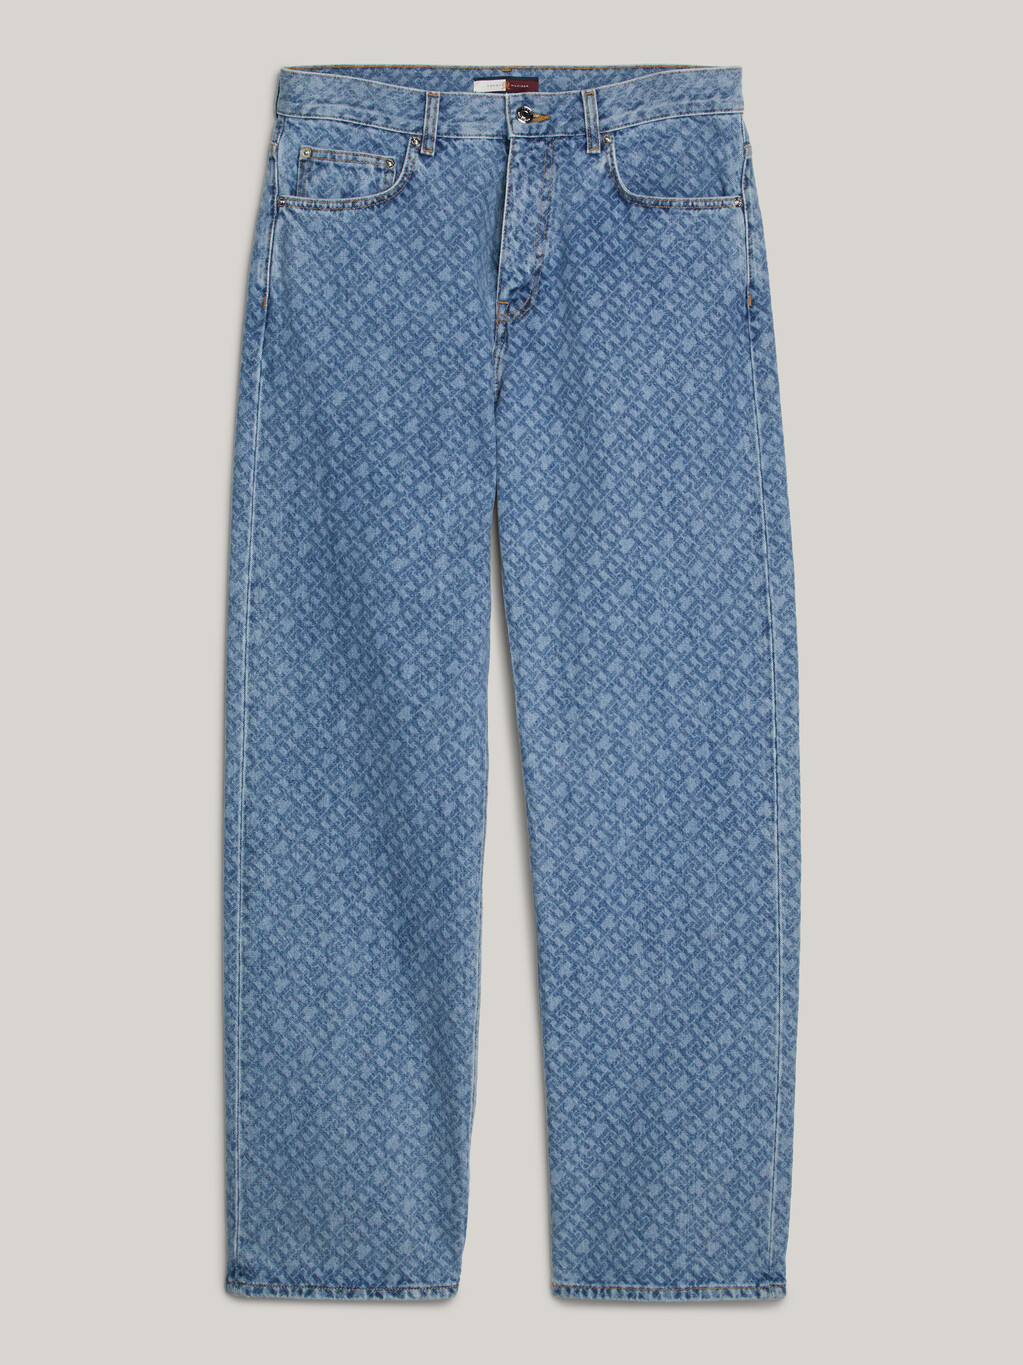 Dad Relaxed Straight TH Monogram Jeans, Indigo Blue, hi-res